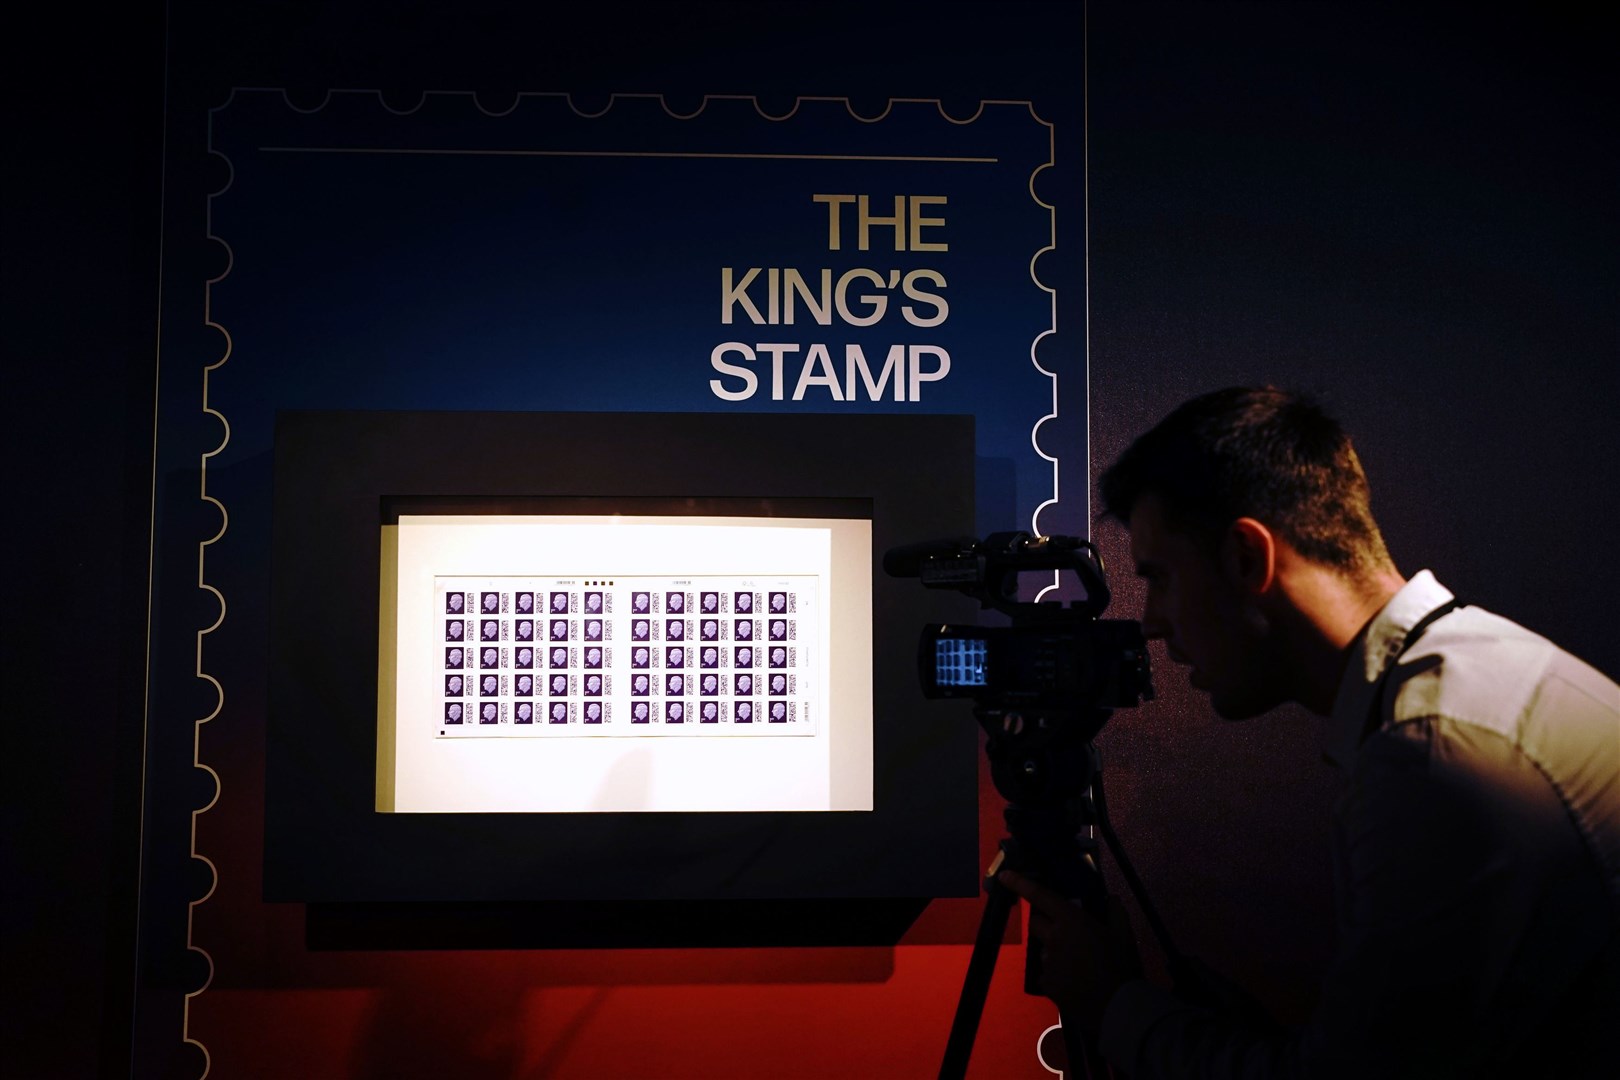 One of the first sheets of the 1st class definitive stamp featuring King Charles III (Victoria Jones/PA)